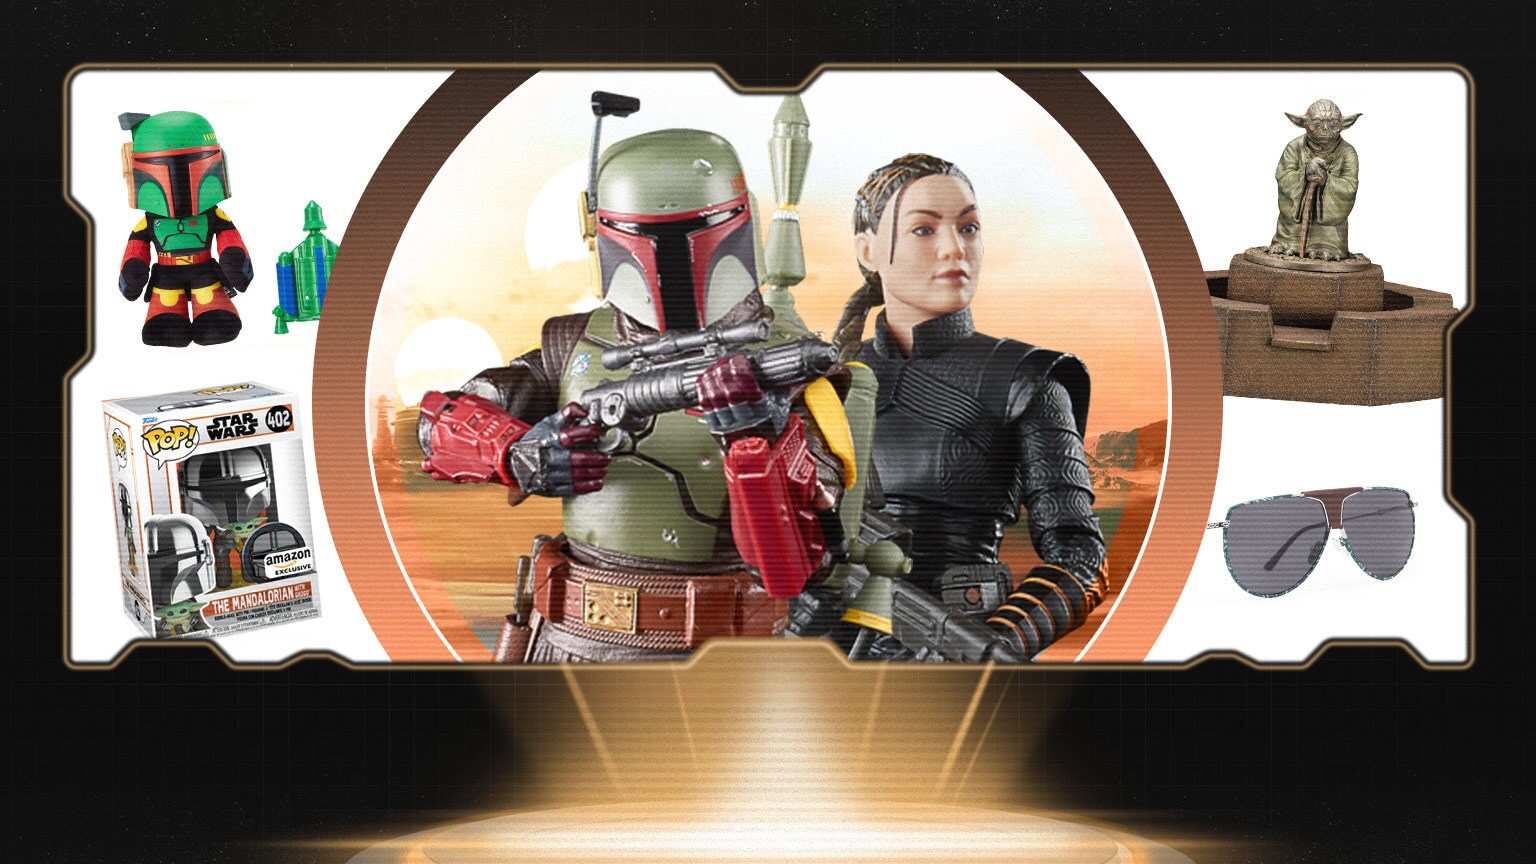 Bring Home the Bounty: New The Book of Boba Fett Black Series Figures Revealed and More!